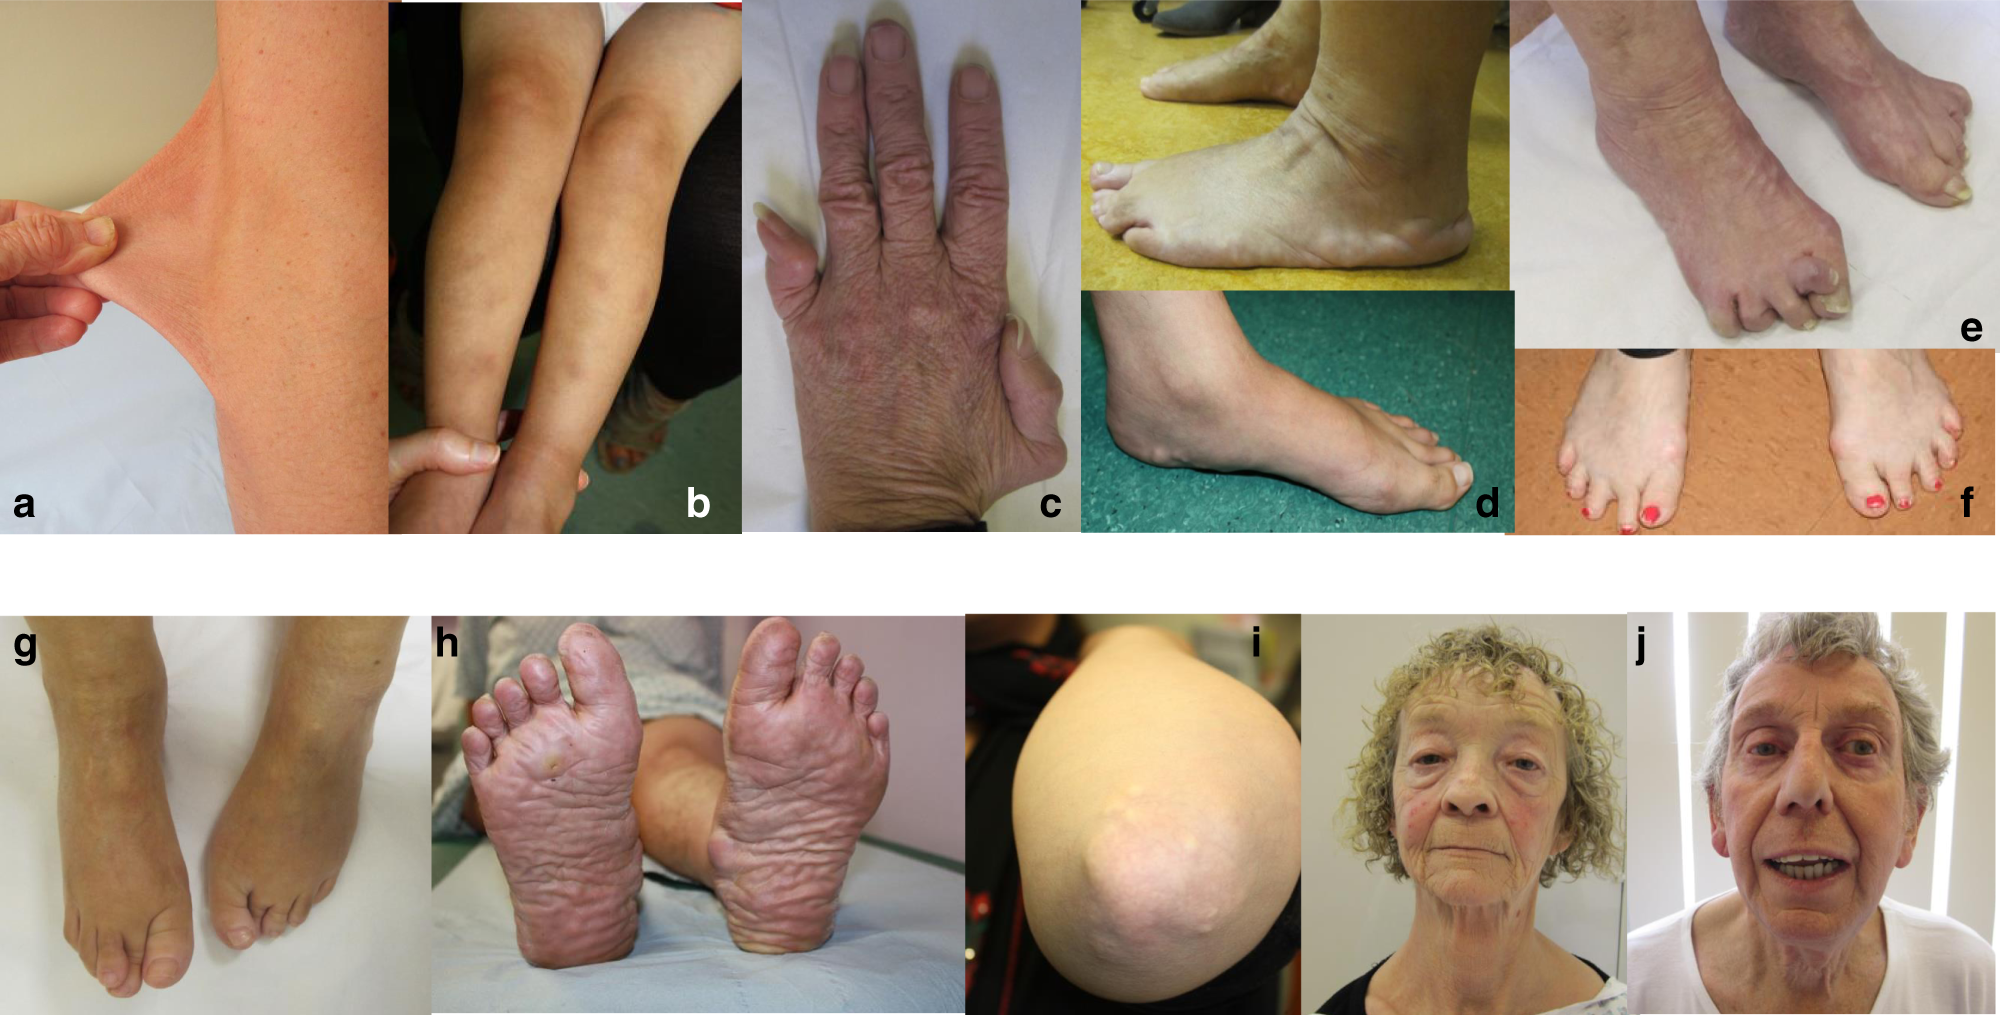 Classical-like Ehlers–Danlos syndrome: a clinical description of 20 newly  identified individuals with evidence of tissue fragility | Genetics in  Medicine